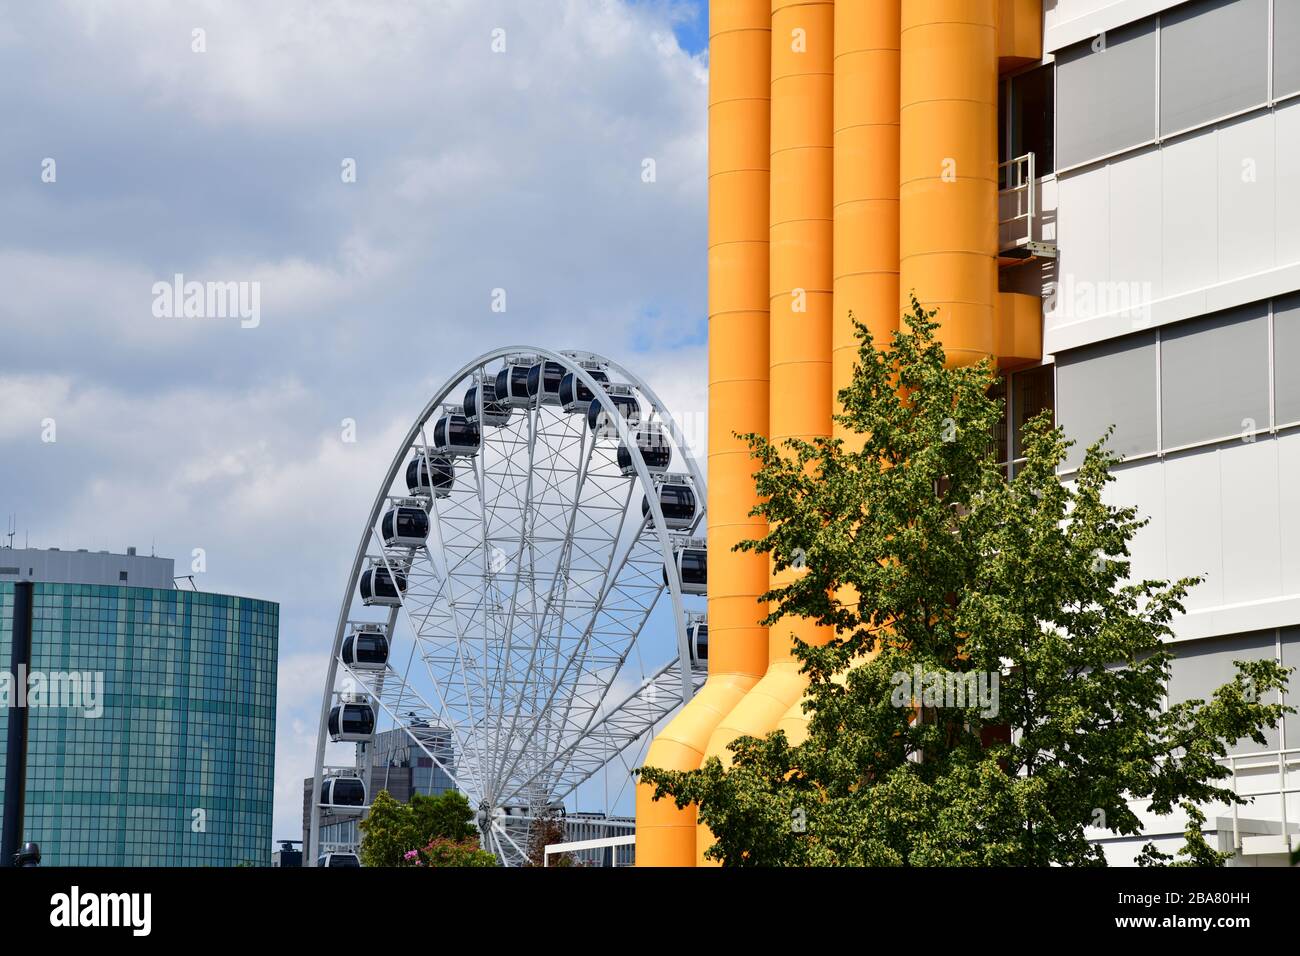 Compressed view of section of the architectural iconic library, ferris wheel and modern buildings in Rotterdam Stock Photo